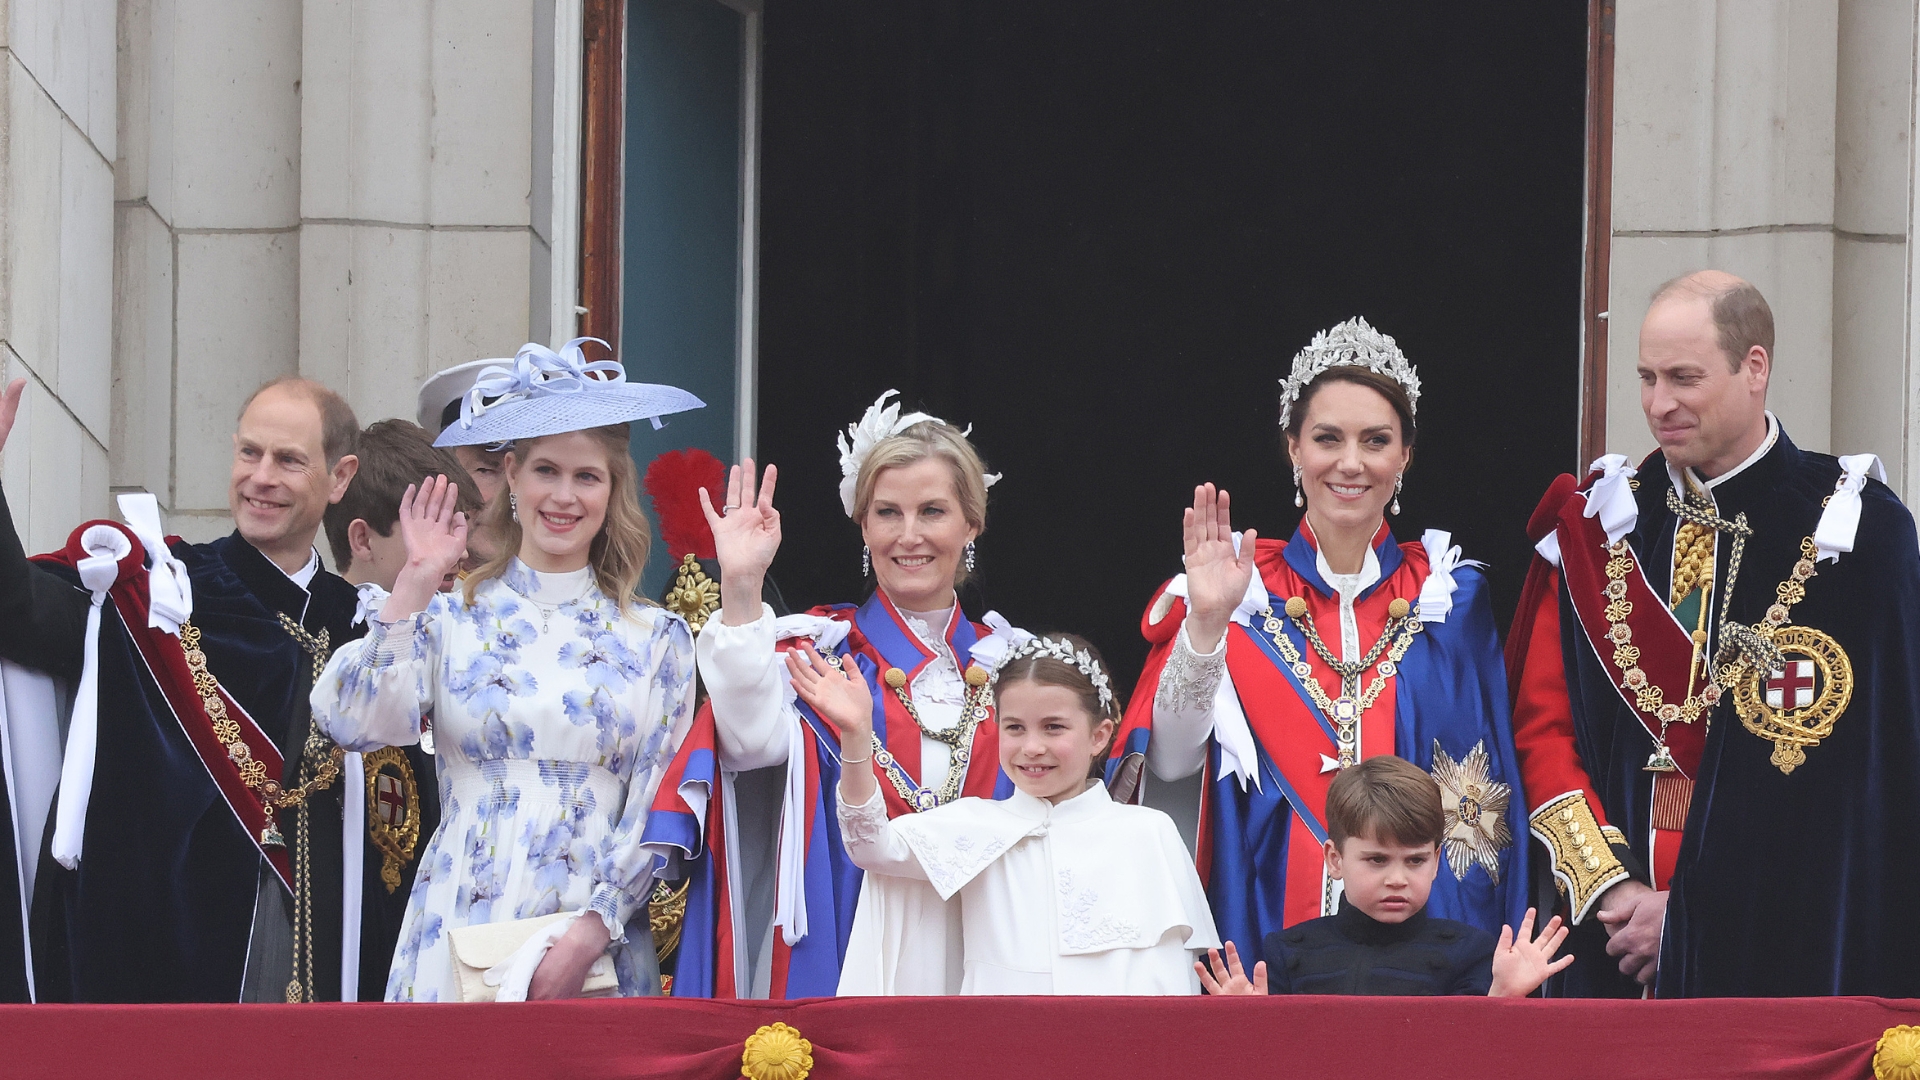 (L-R) Lady Louise Windsor, Vice Admiral Sir Timothy Laurence, Sophie, Duchess of Edinburgh, Princess Charlotte of Wales, Anne, Princess Royal, Catherine, Princess of Wales, Prince Louis of Wales, Prince William, Prince of Wales during the Coronation of King Charles III and Queen Camilla on May 06, 2023 in London, England.